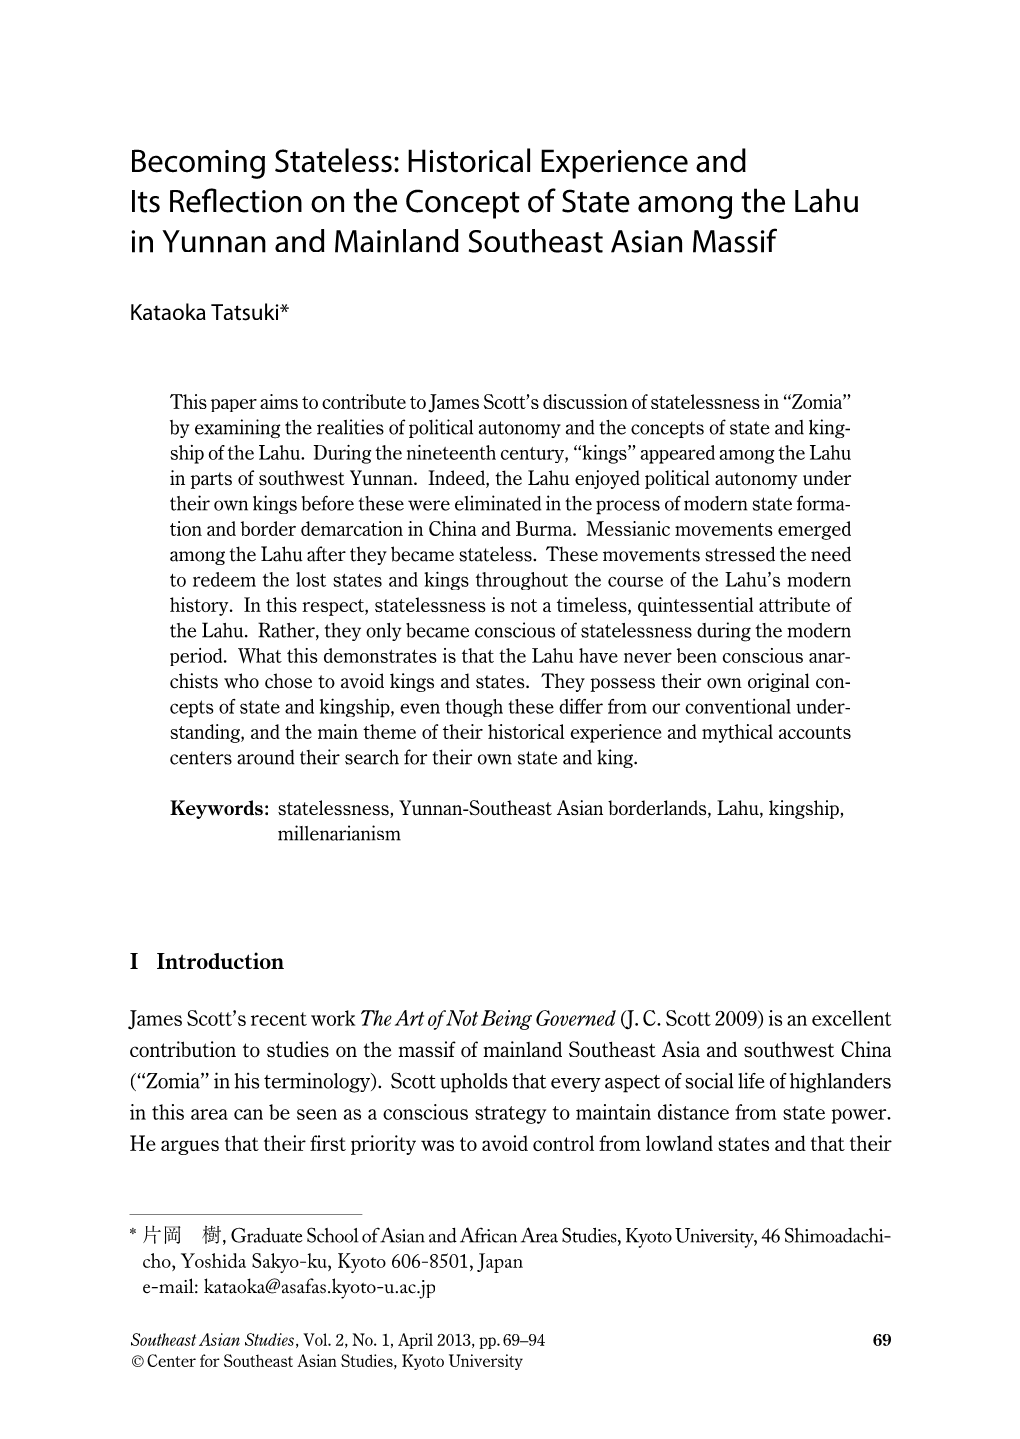 Becoming Stateless: Historical Experience and Its Refl Ection on the Concept of State Among the Lahu in Yunnan and Mainland Southeast Asian Massif